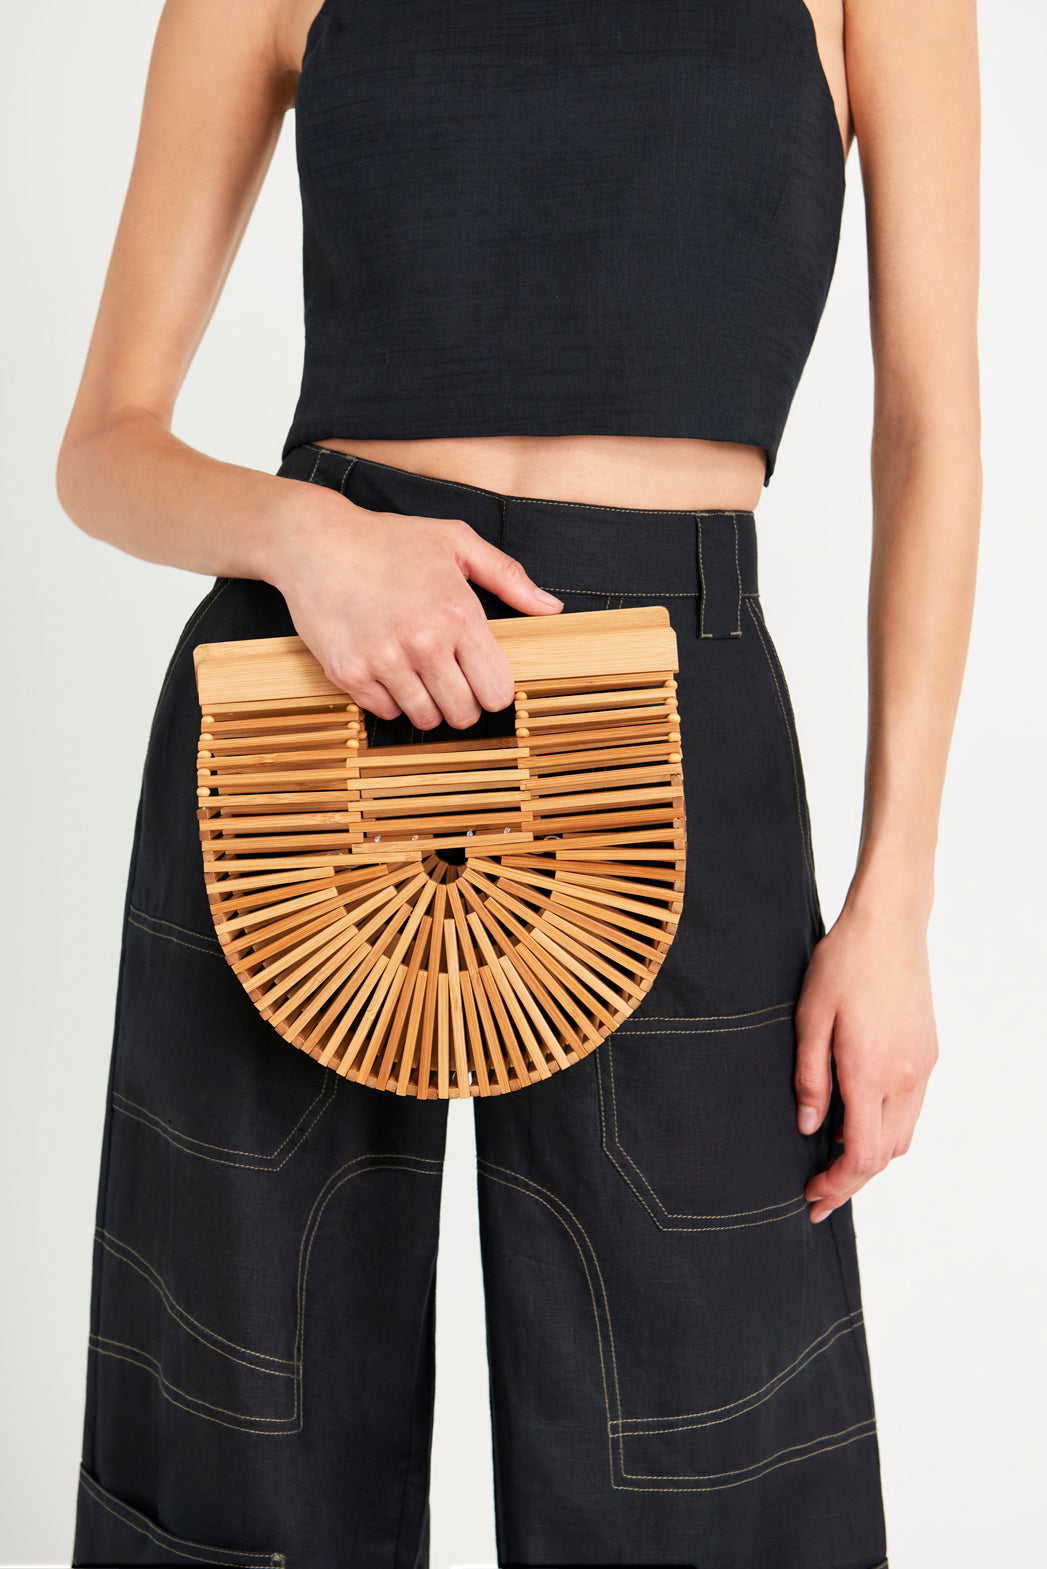 Cult Gaia Did Not Invent the Bamboo Bag but is Claiming Exclusive Rights  Nonetheless - The Fashion Law